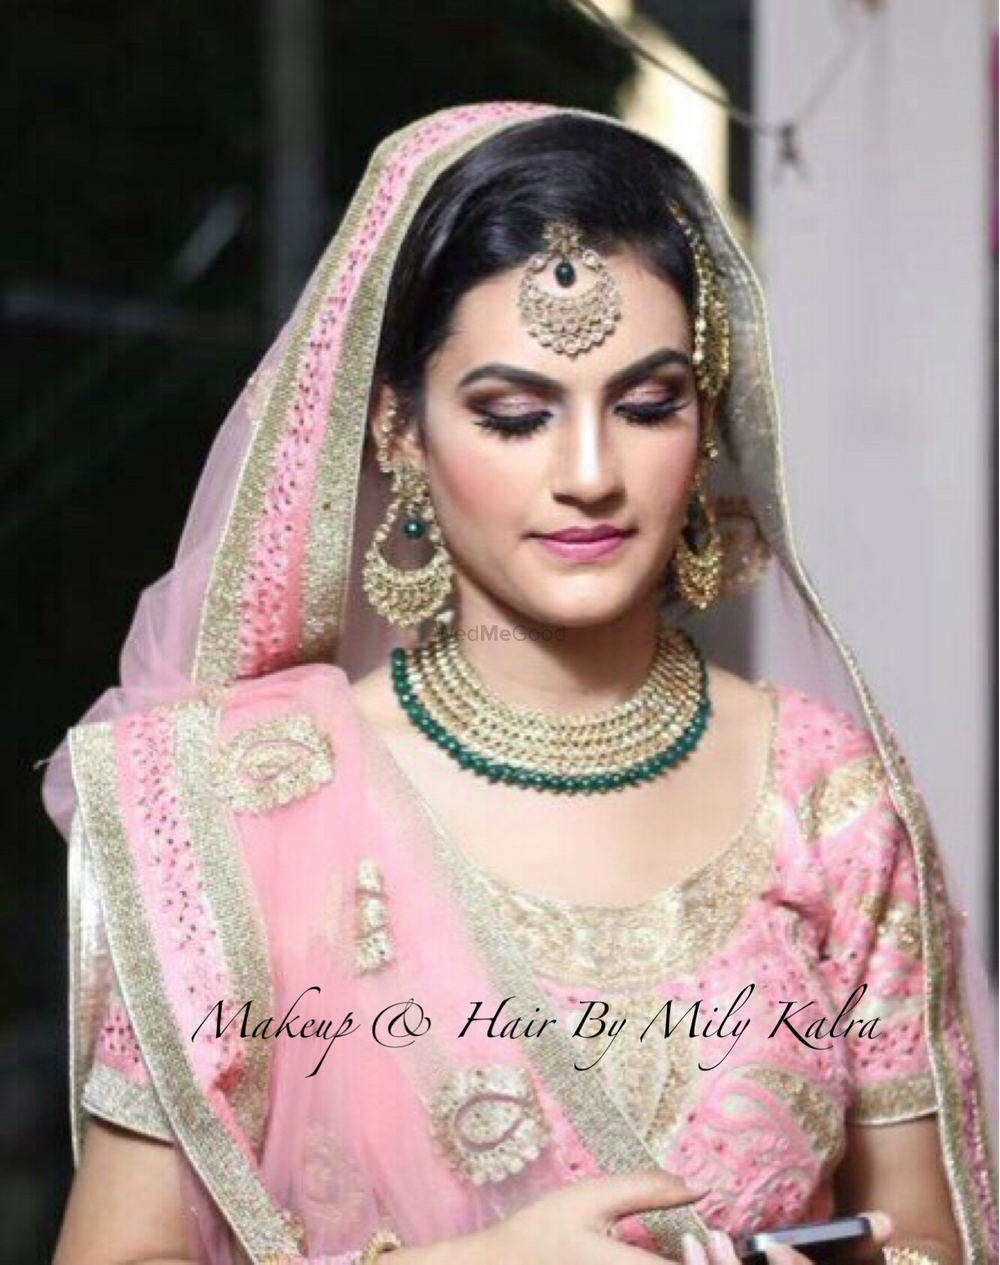 Photo From The Quintessential Bride - By Makeup By Mily Kalra